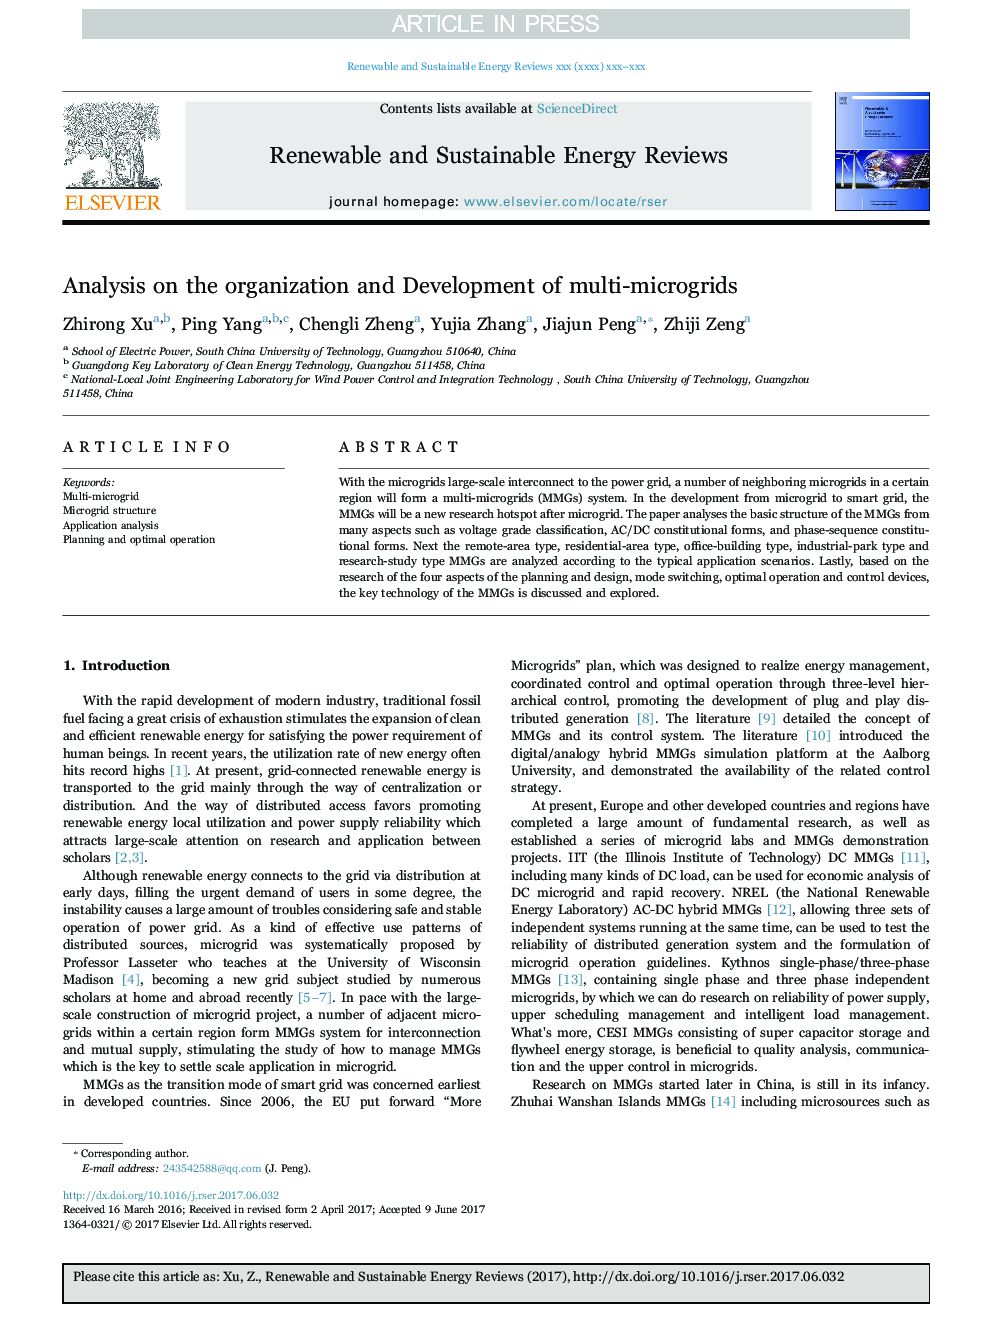 Analysis on the organization and Development of multi-microgrids